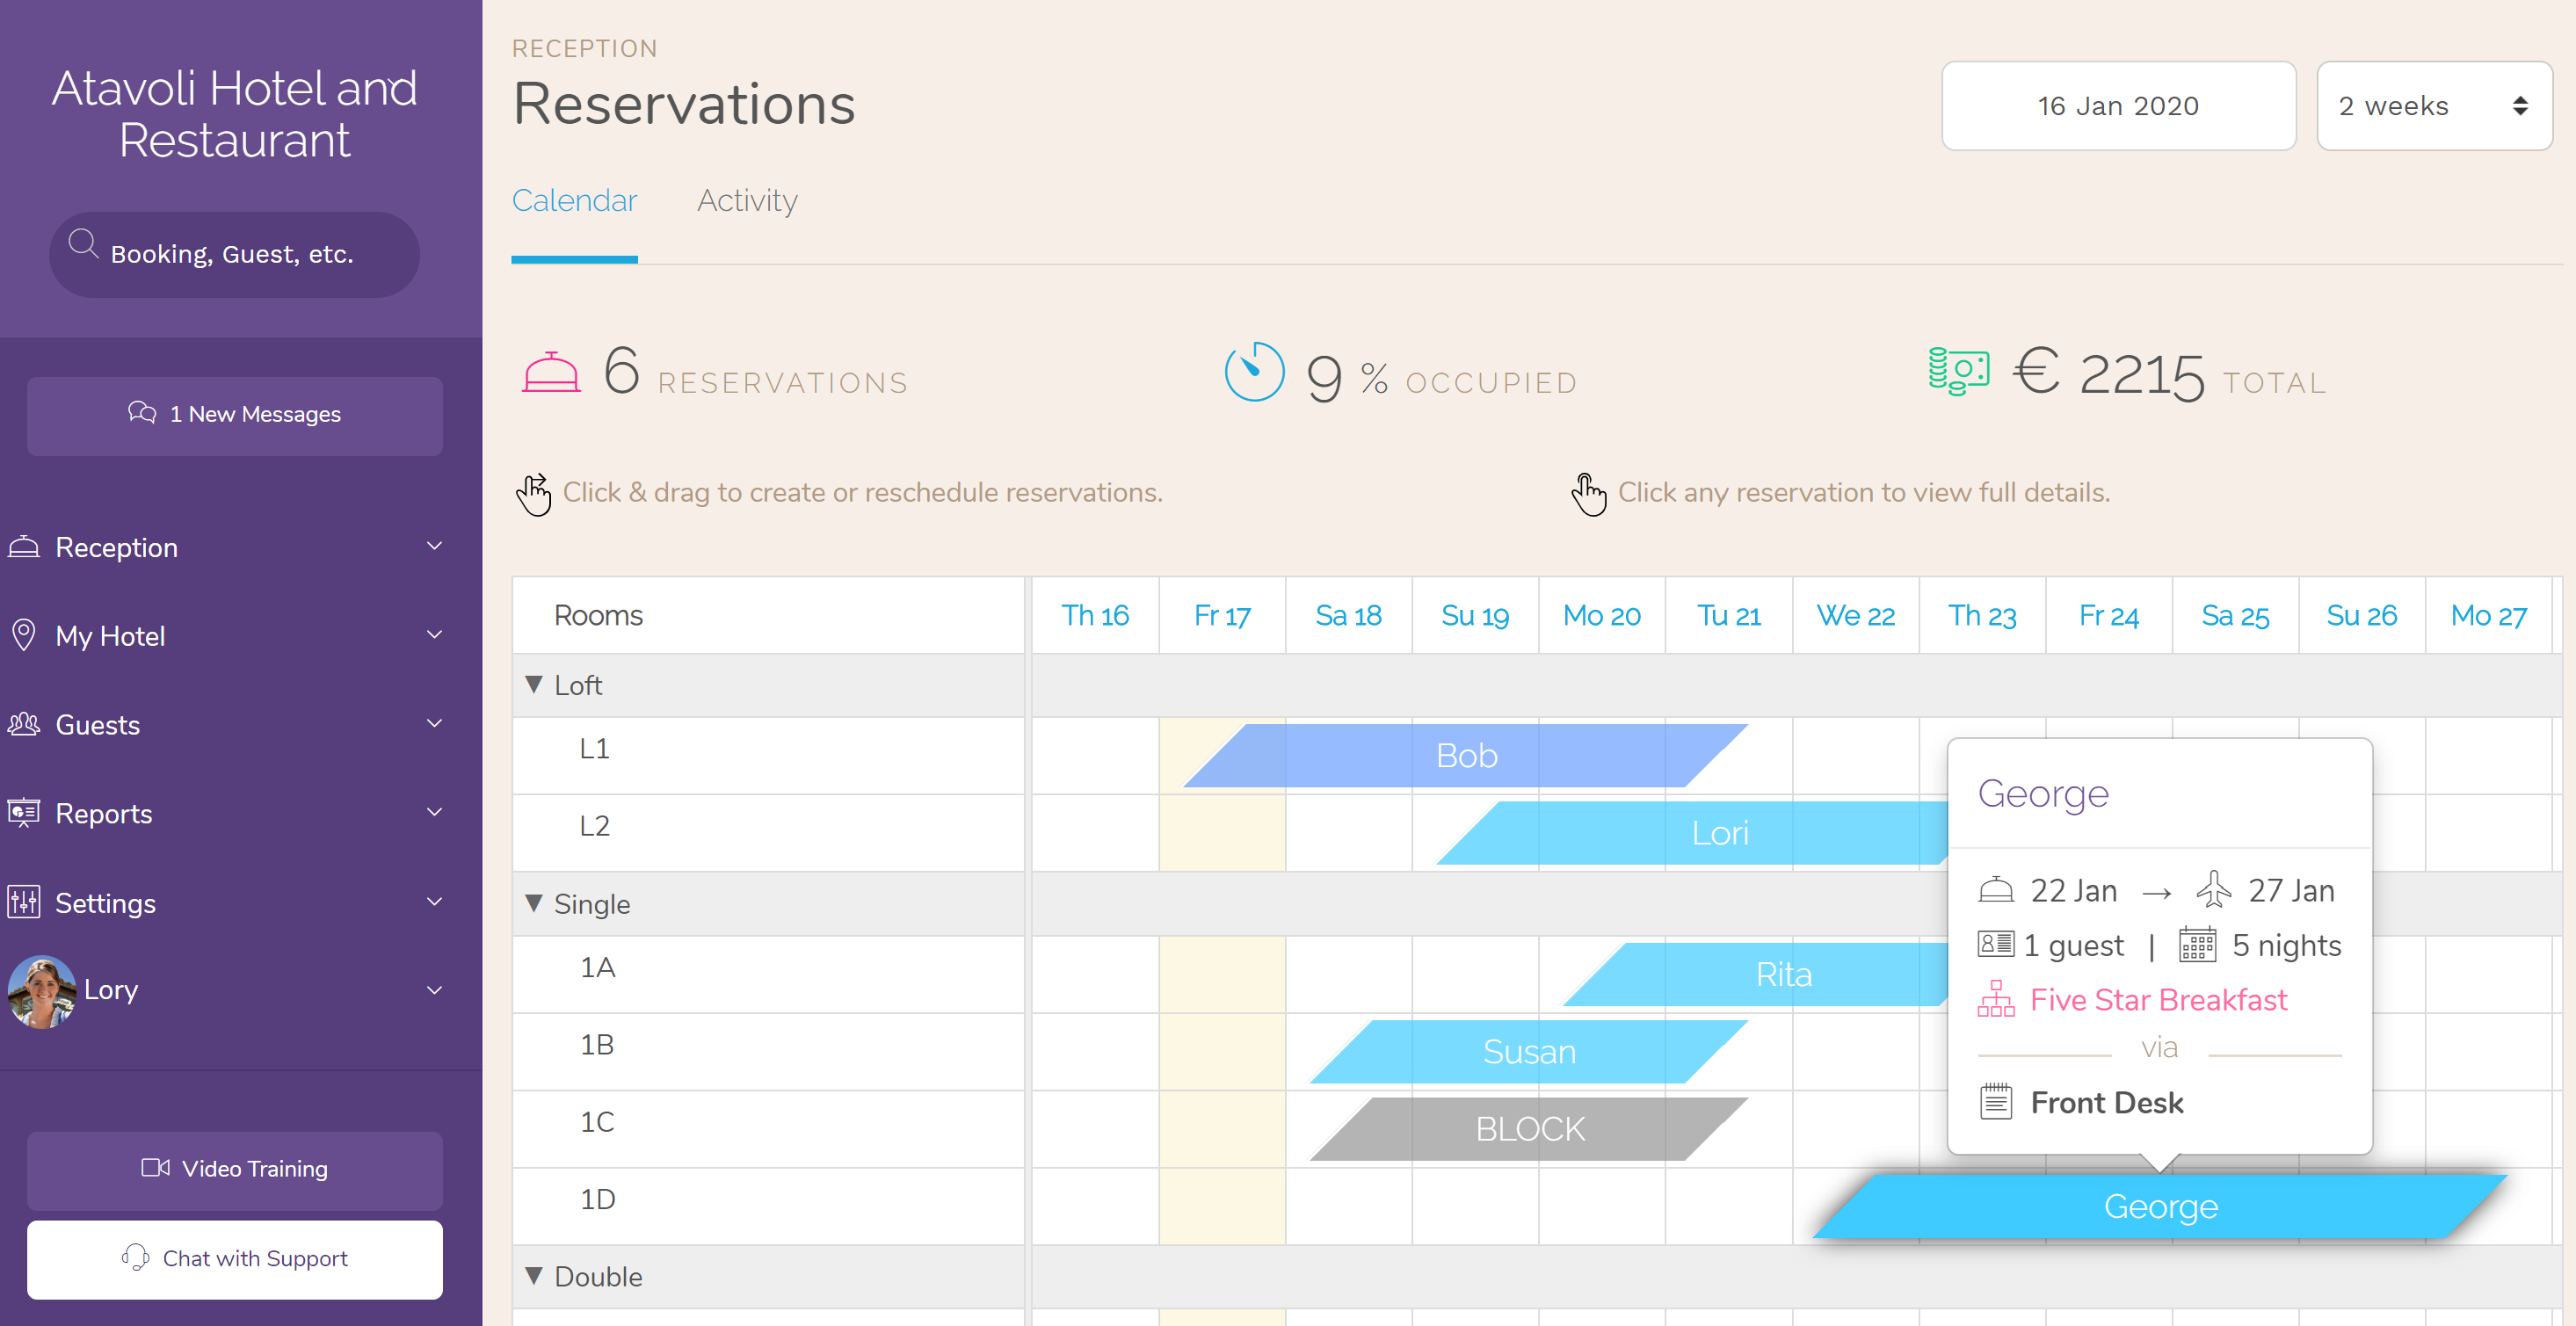 Hotel Drag-n-Drop Calendar Your reservations calendar has been updated to make it even easier to manage your hotel’s daily activity. You can now drag and resize to create and reschedule bookings.